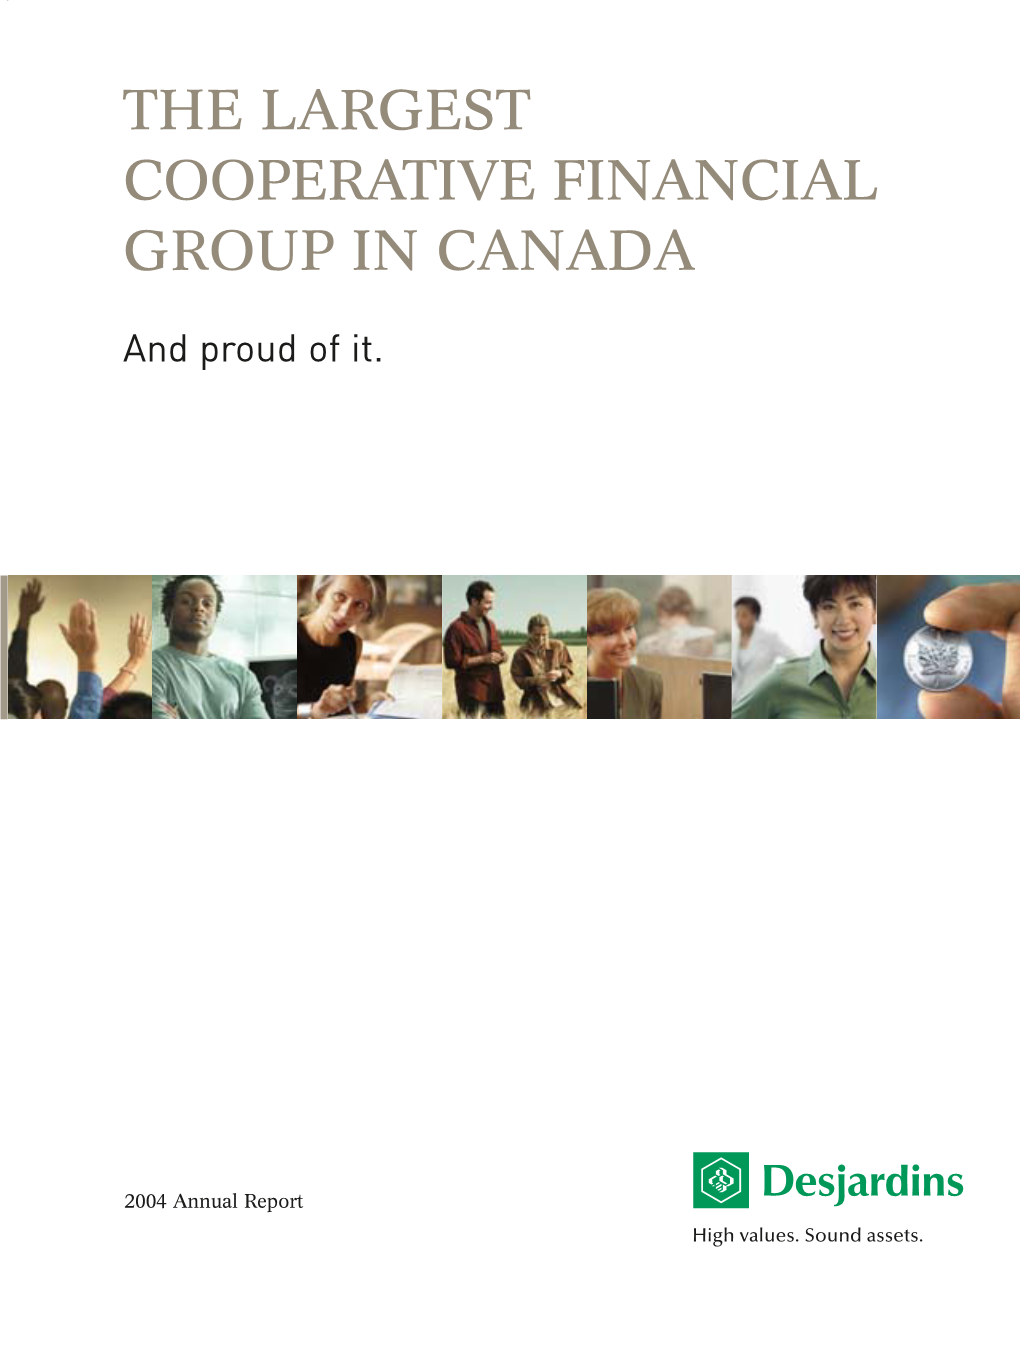 THE LARGEST COOPERATIVE FINANCIAL GROUP in CANADA Annual Report